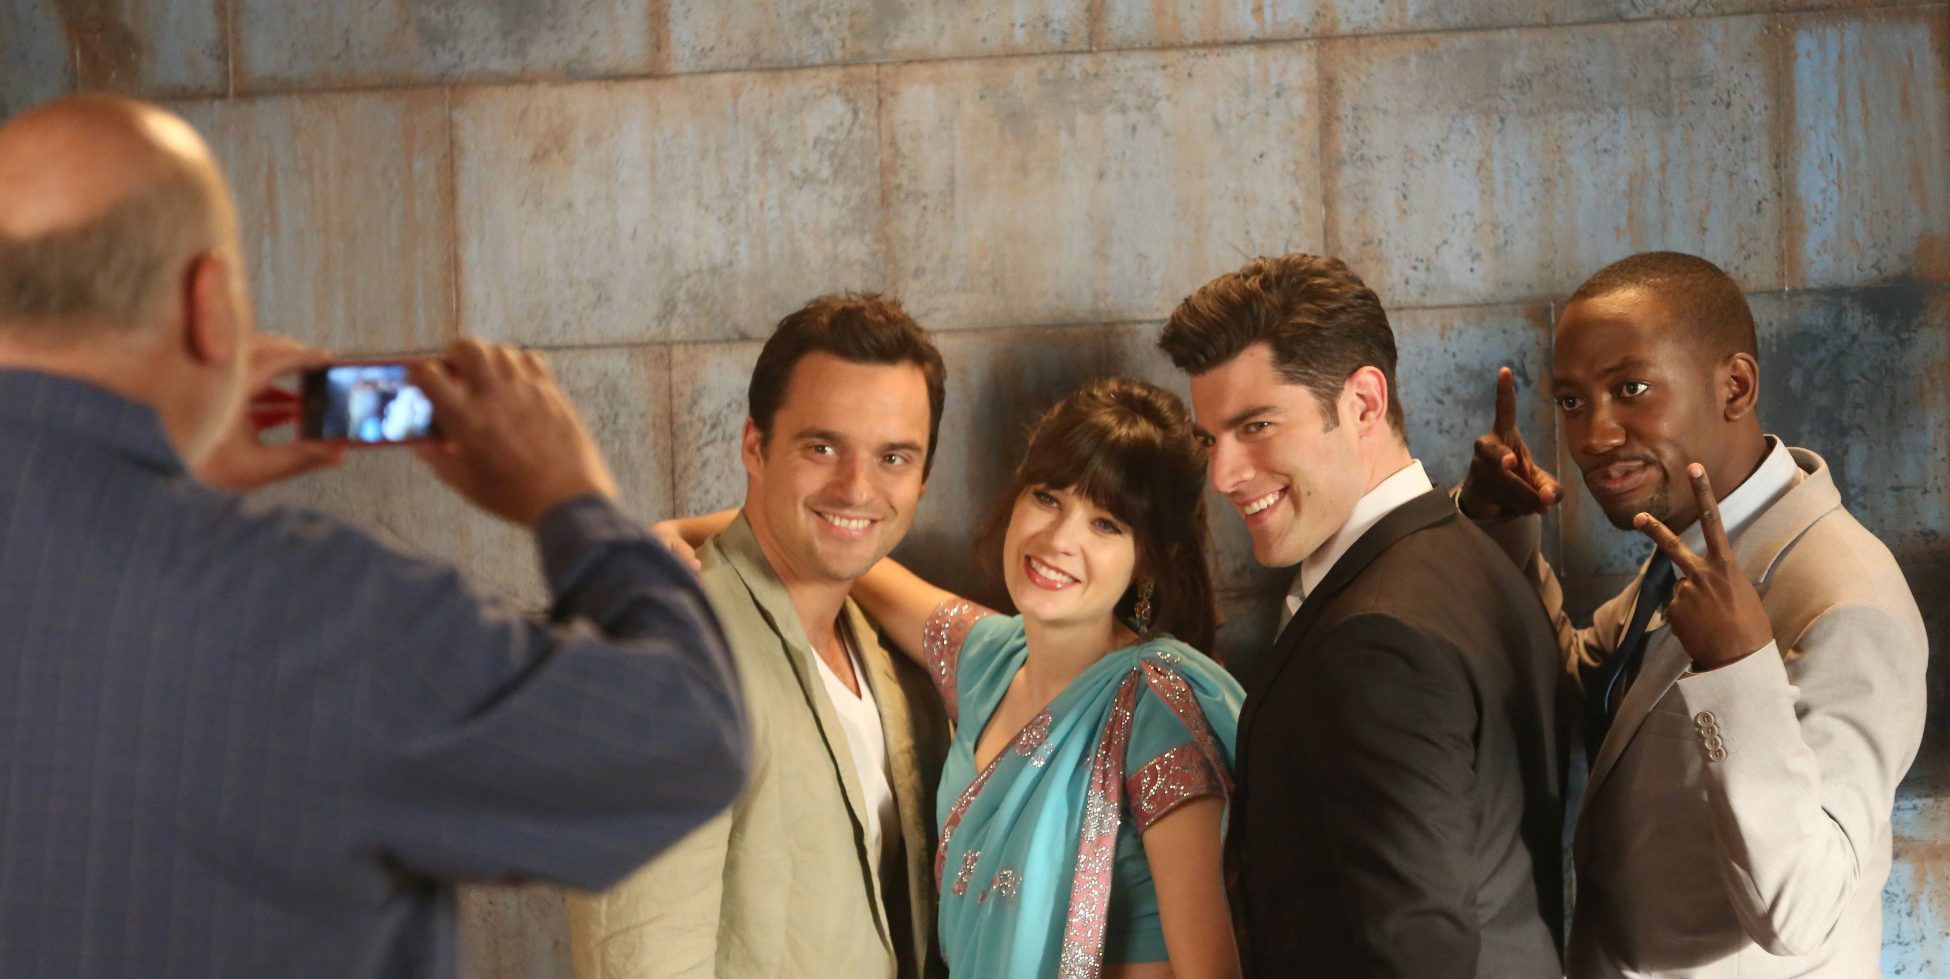 New Girl The 15 Best Episodes (According To IMDb)